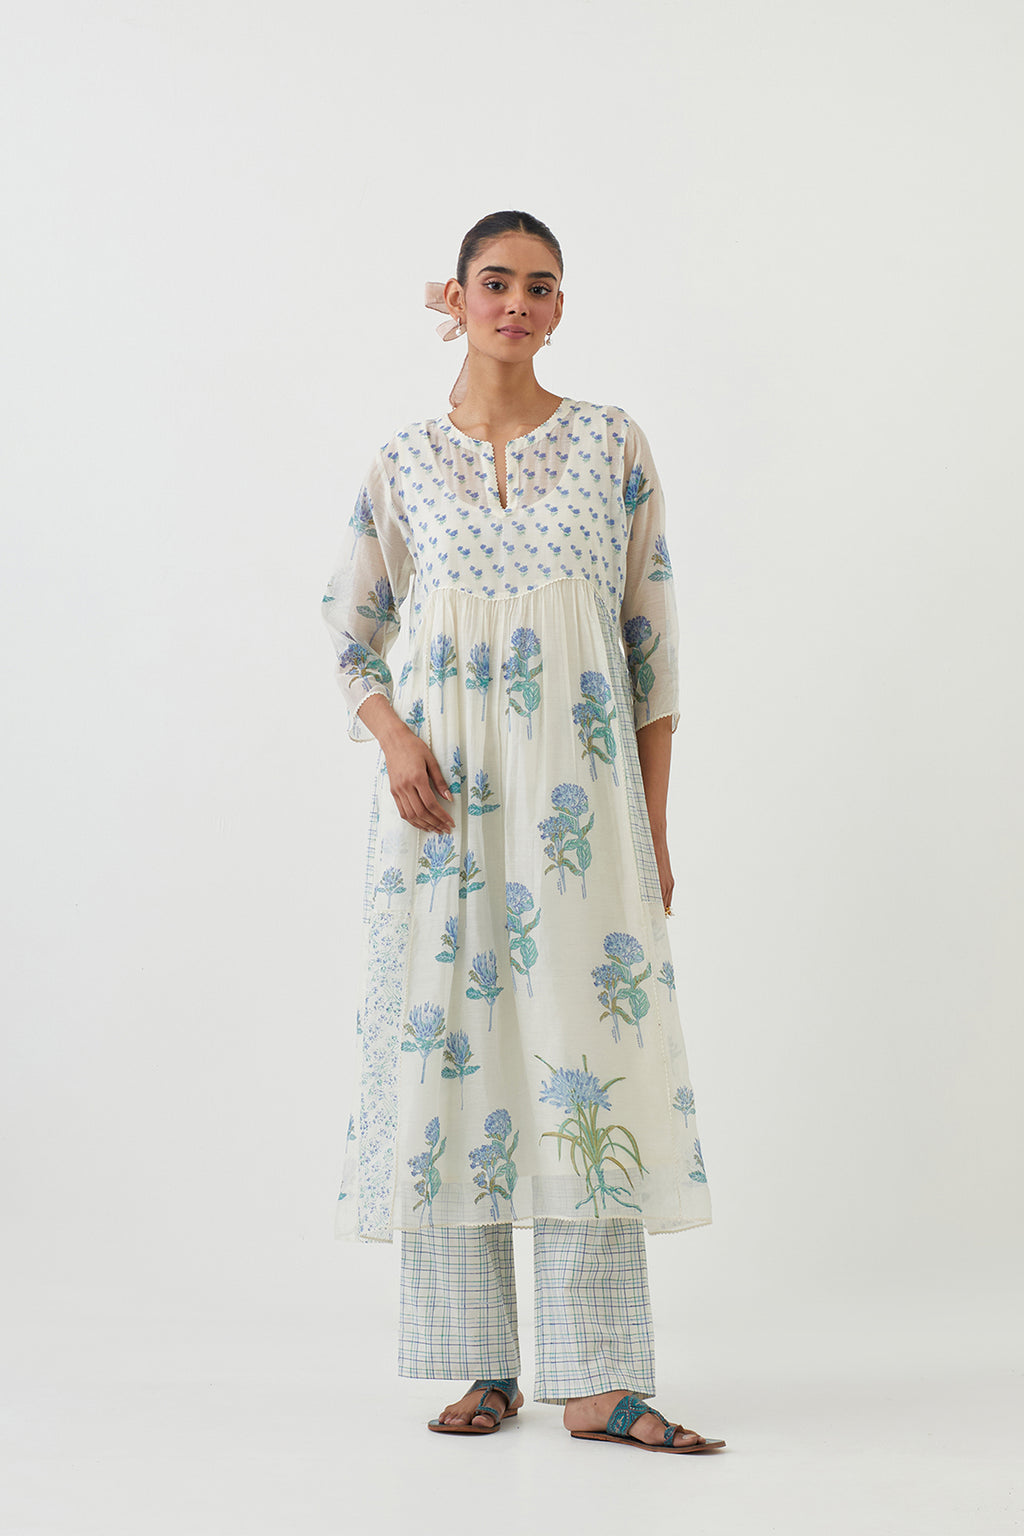 Off white cotton chanderi Kurta dress set  with all-over assorted blue colored floral hand block print.